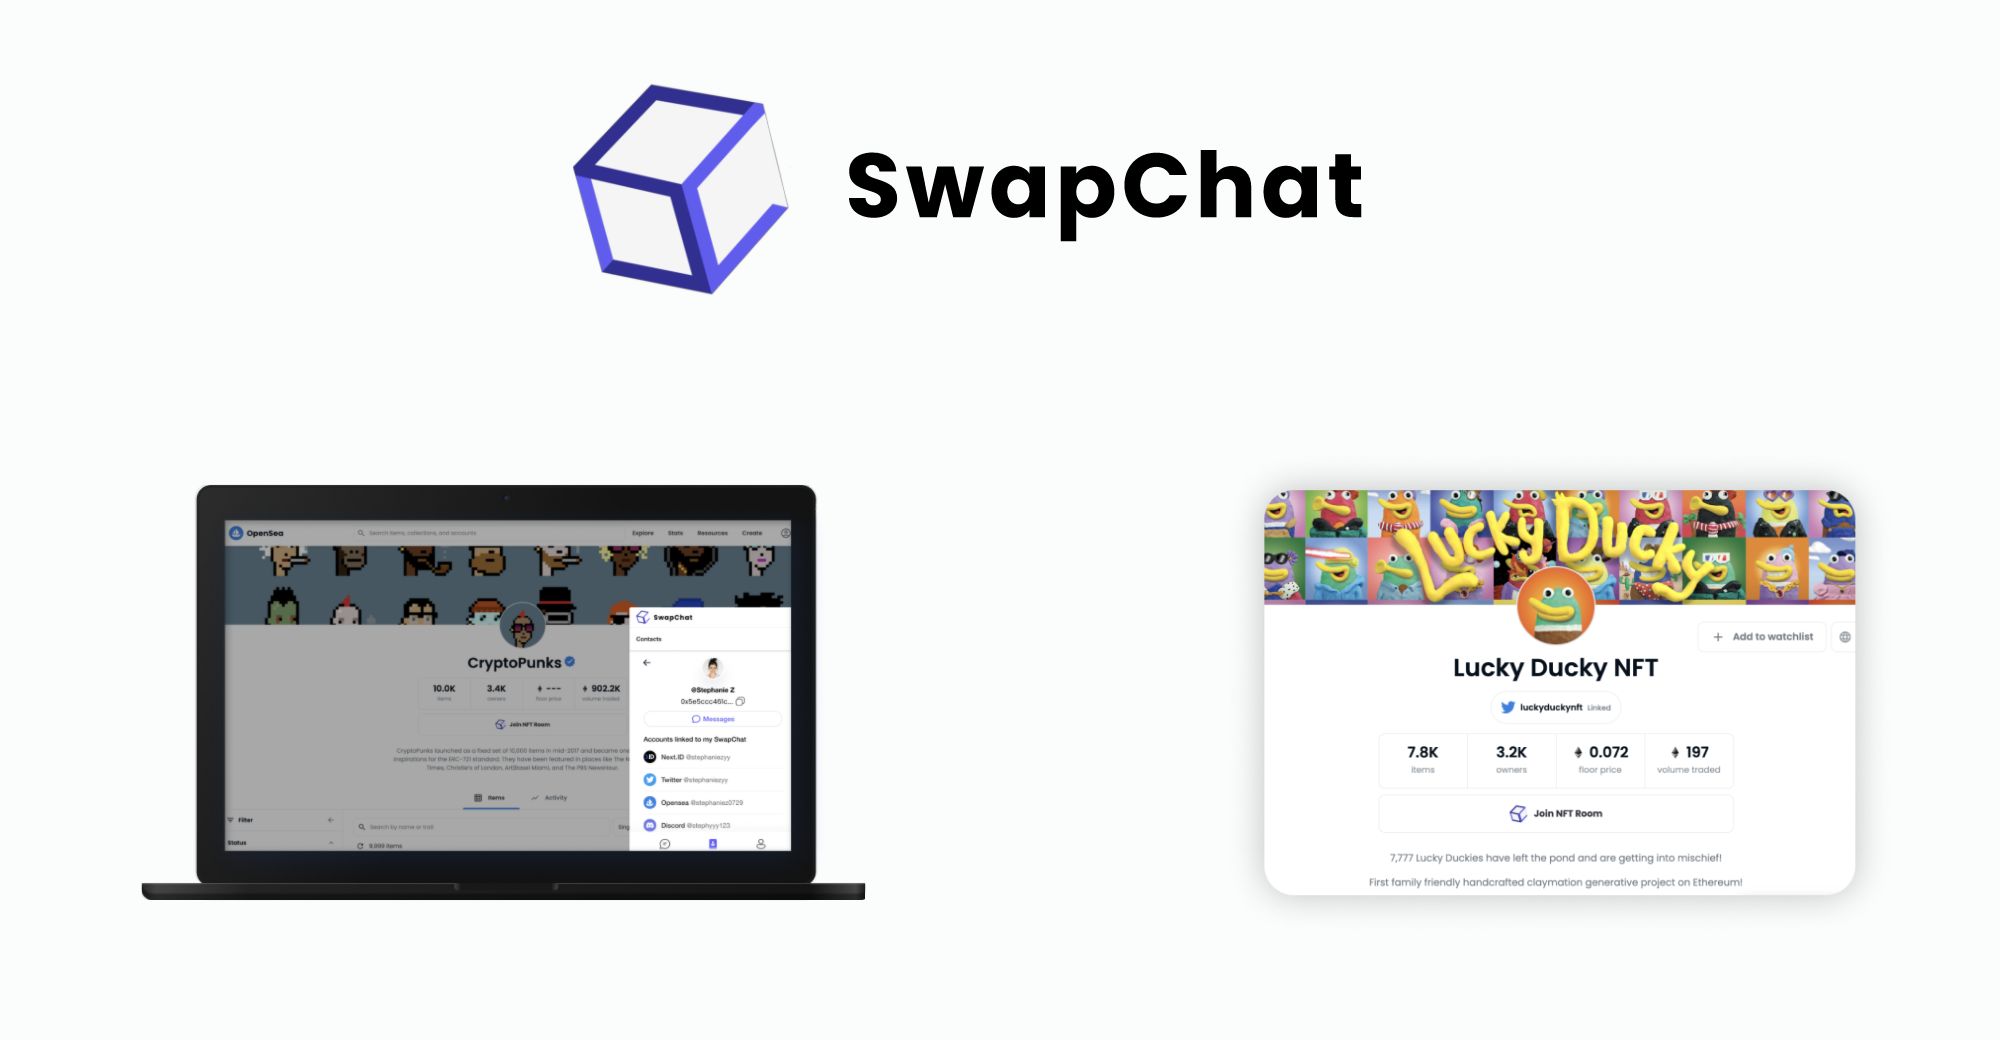 Swapchat: The Protocol Layer Is Fundamental